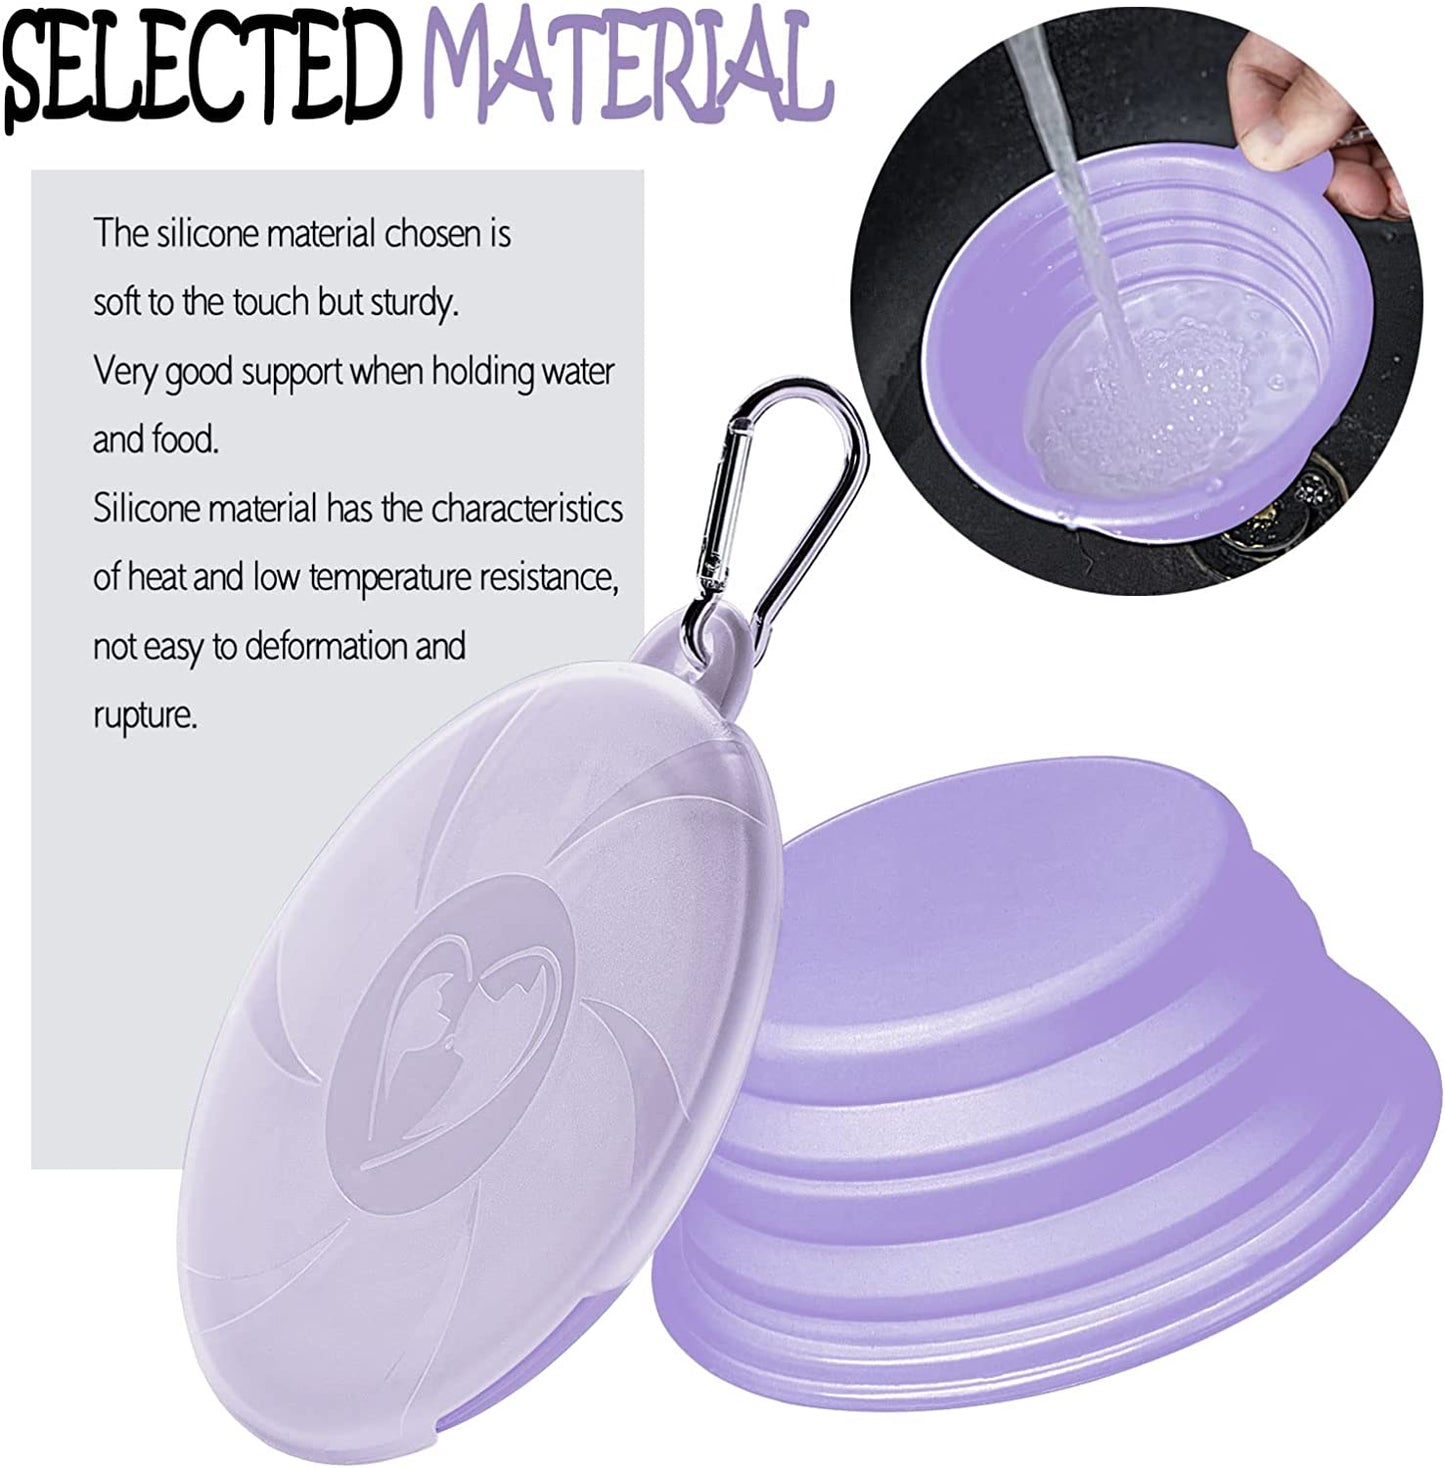 Collapsible Dog Bowls - Portable Travel Dog Bowls with Lids & Carabiners, 1 Pack Silicone Feeding Watering Purple Pet Bowls for Dogs Cats, 450Ml/15Oz Collapsable Doggy Bowl for Walking Hiking Camping